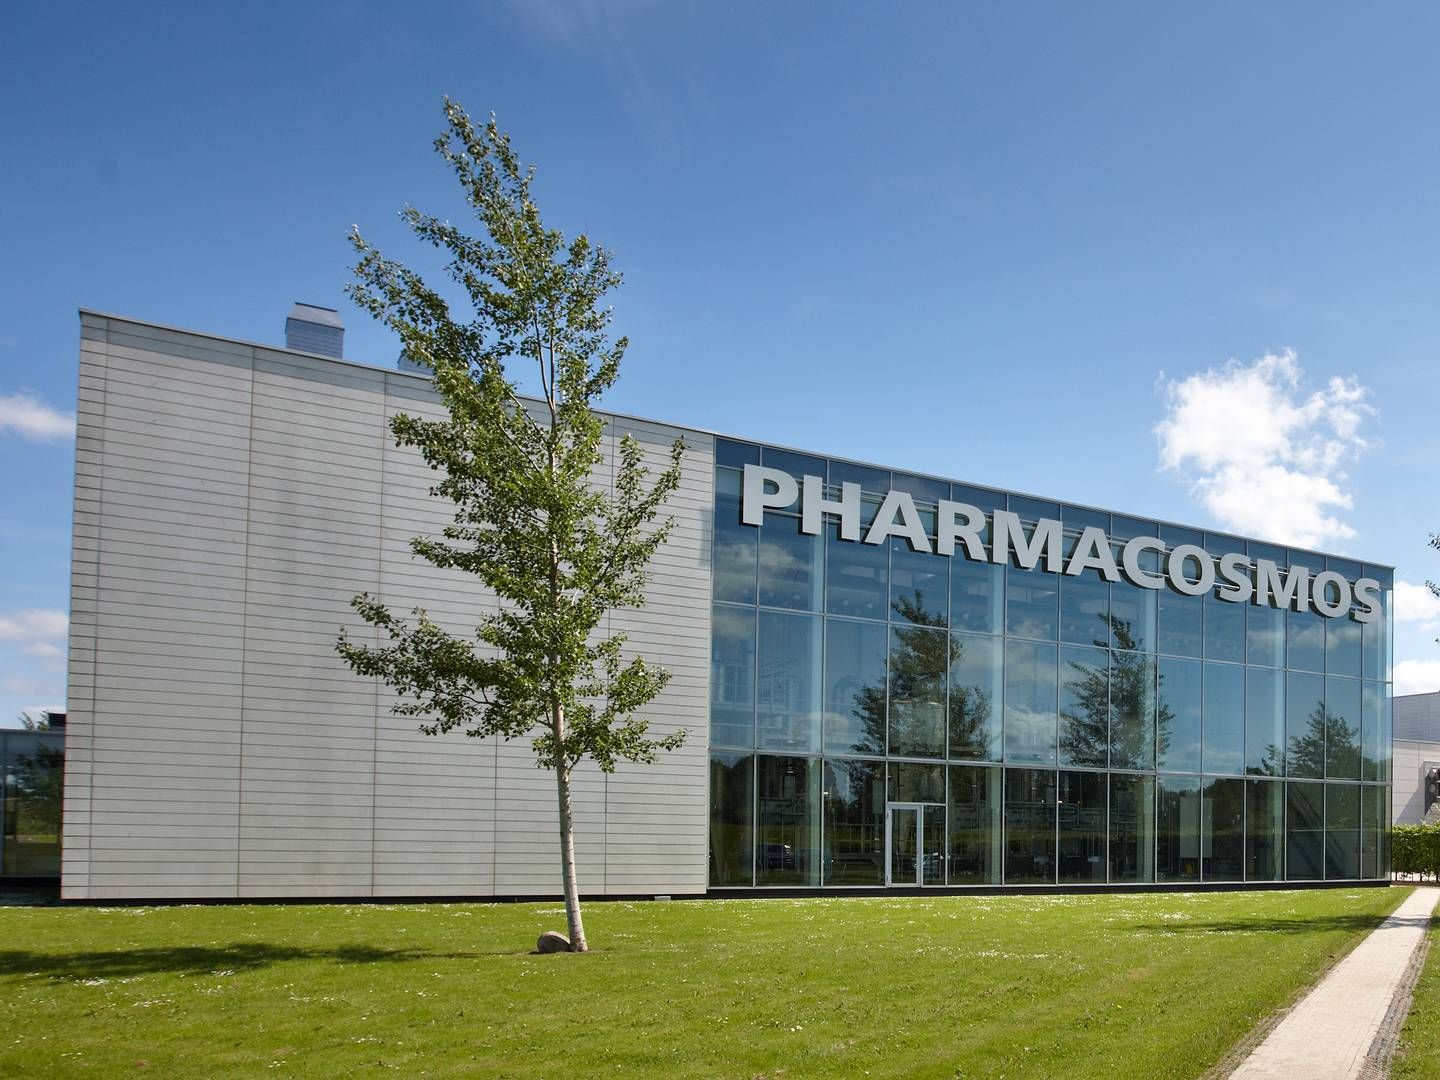 Pharmacosmos is located in Danish town Holbæk, and employs approximately 500 people in total | Photo: Pharmacosmos / Pr